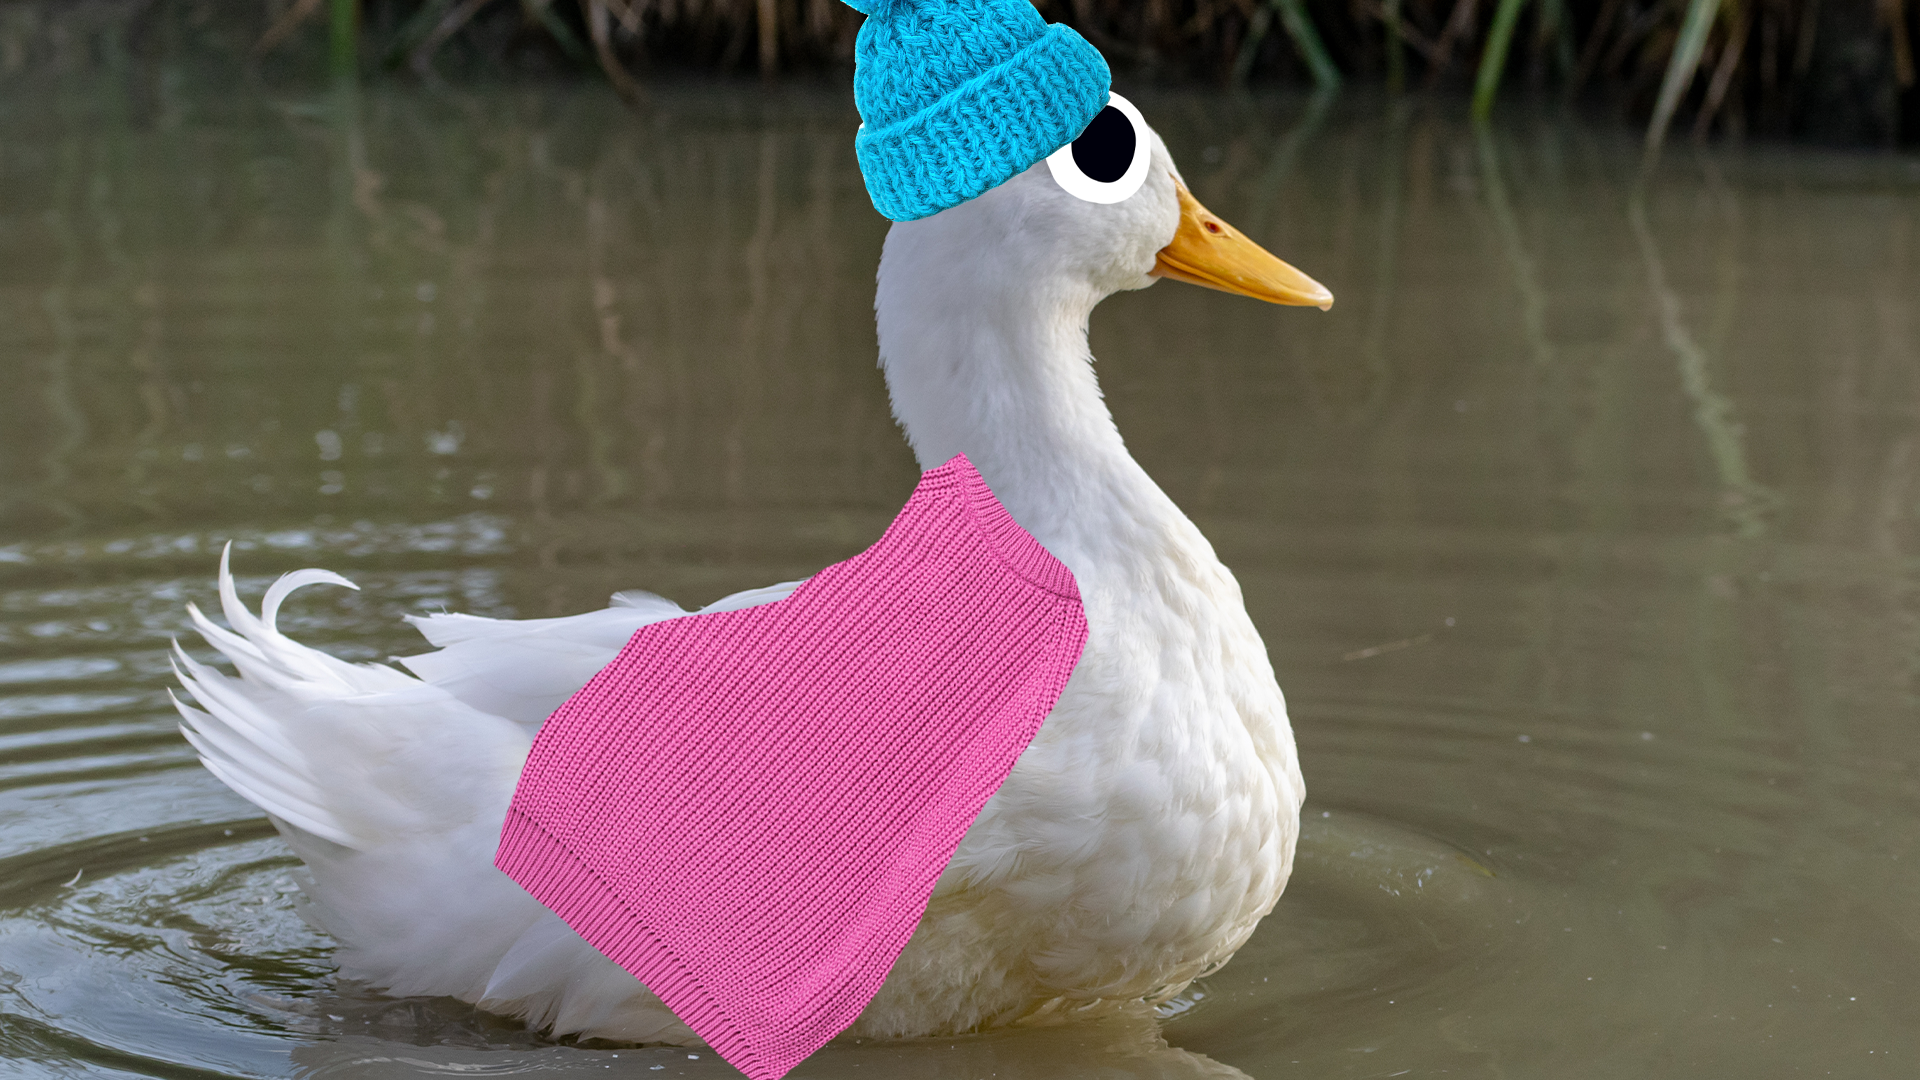 A duck in a hat and shawl